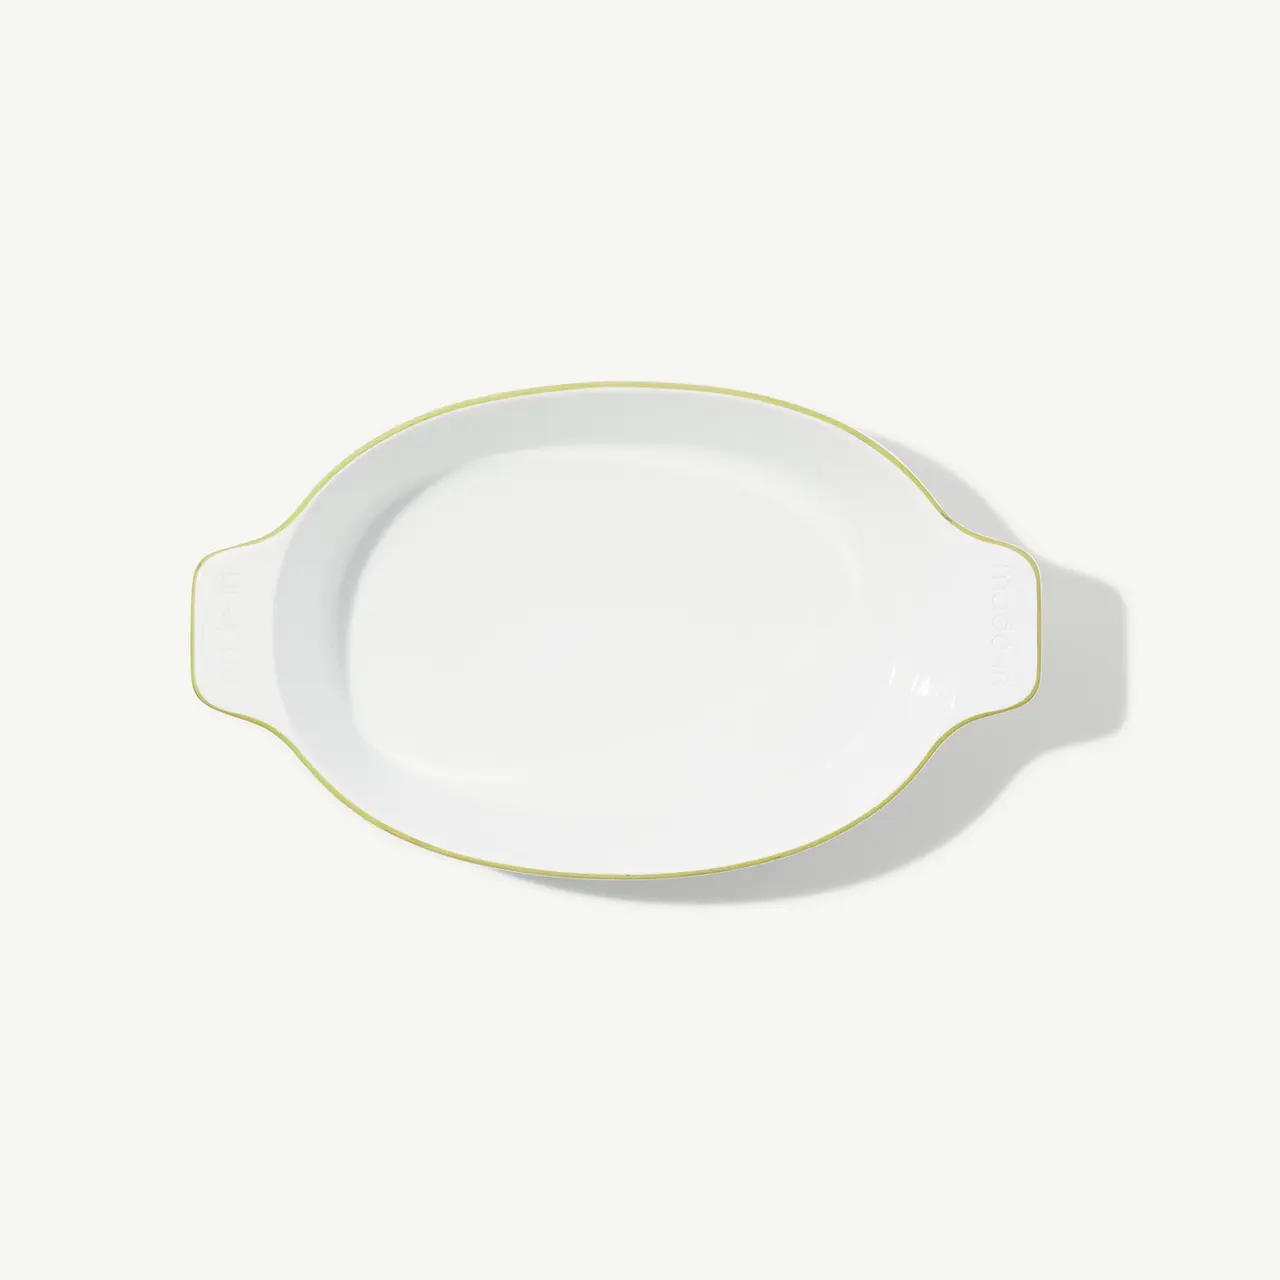 An oval-shaped white ceramic platter with a yellow rim on a plain background.